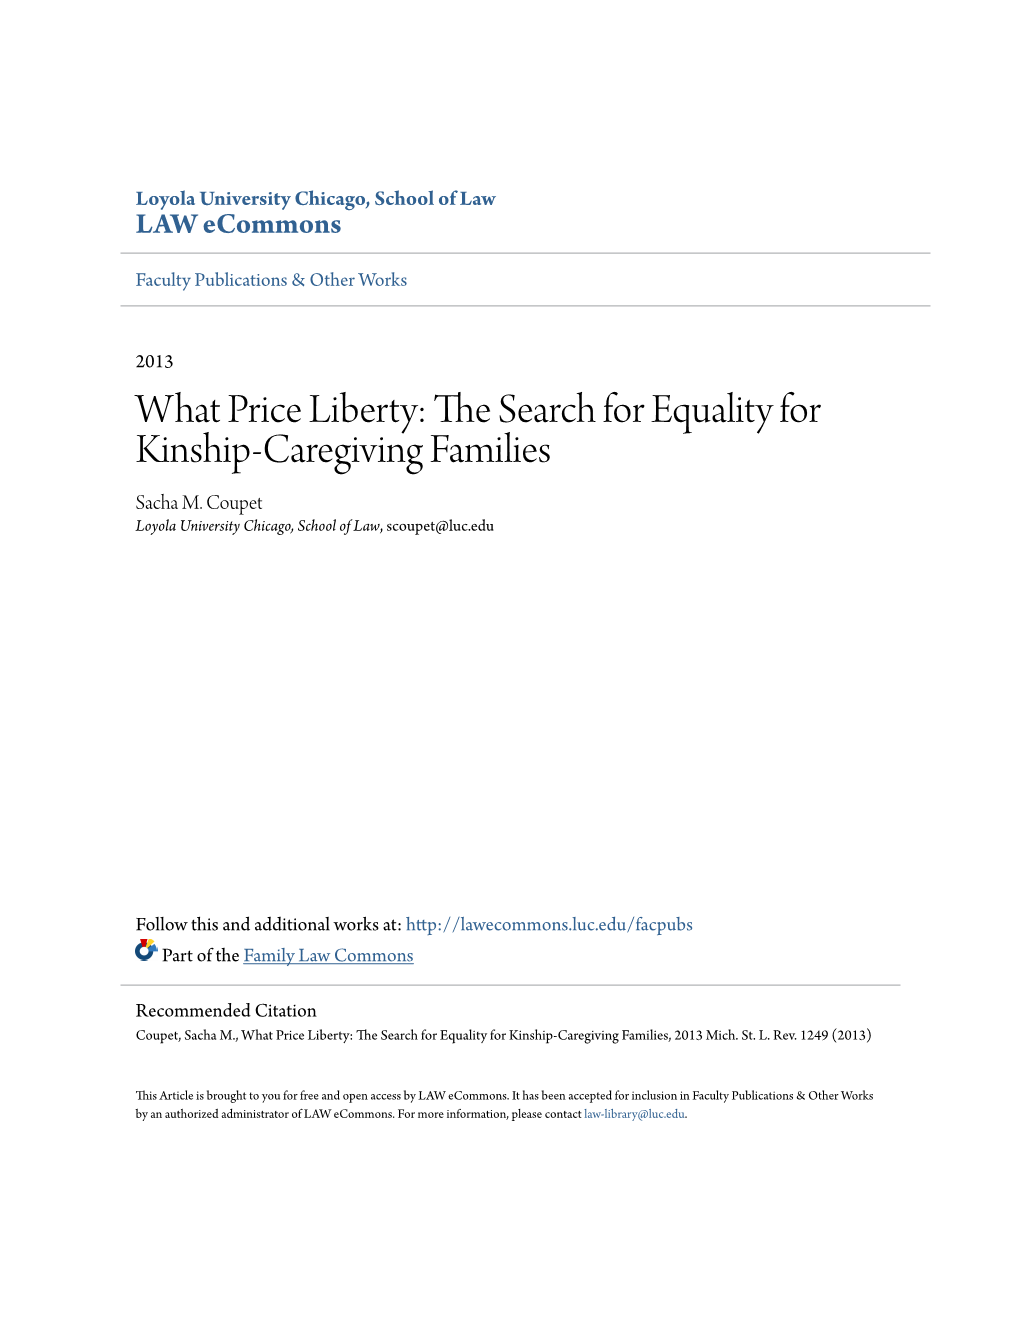 What Price Liberty: the Search for Equality For